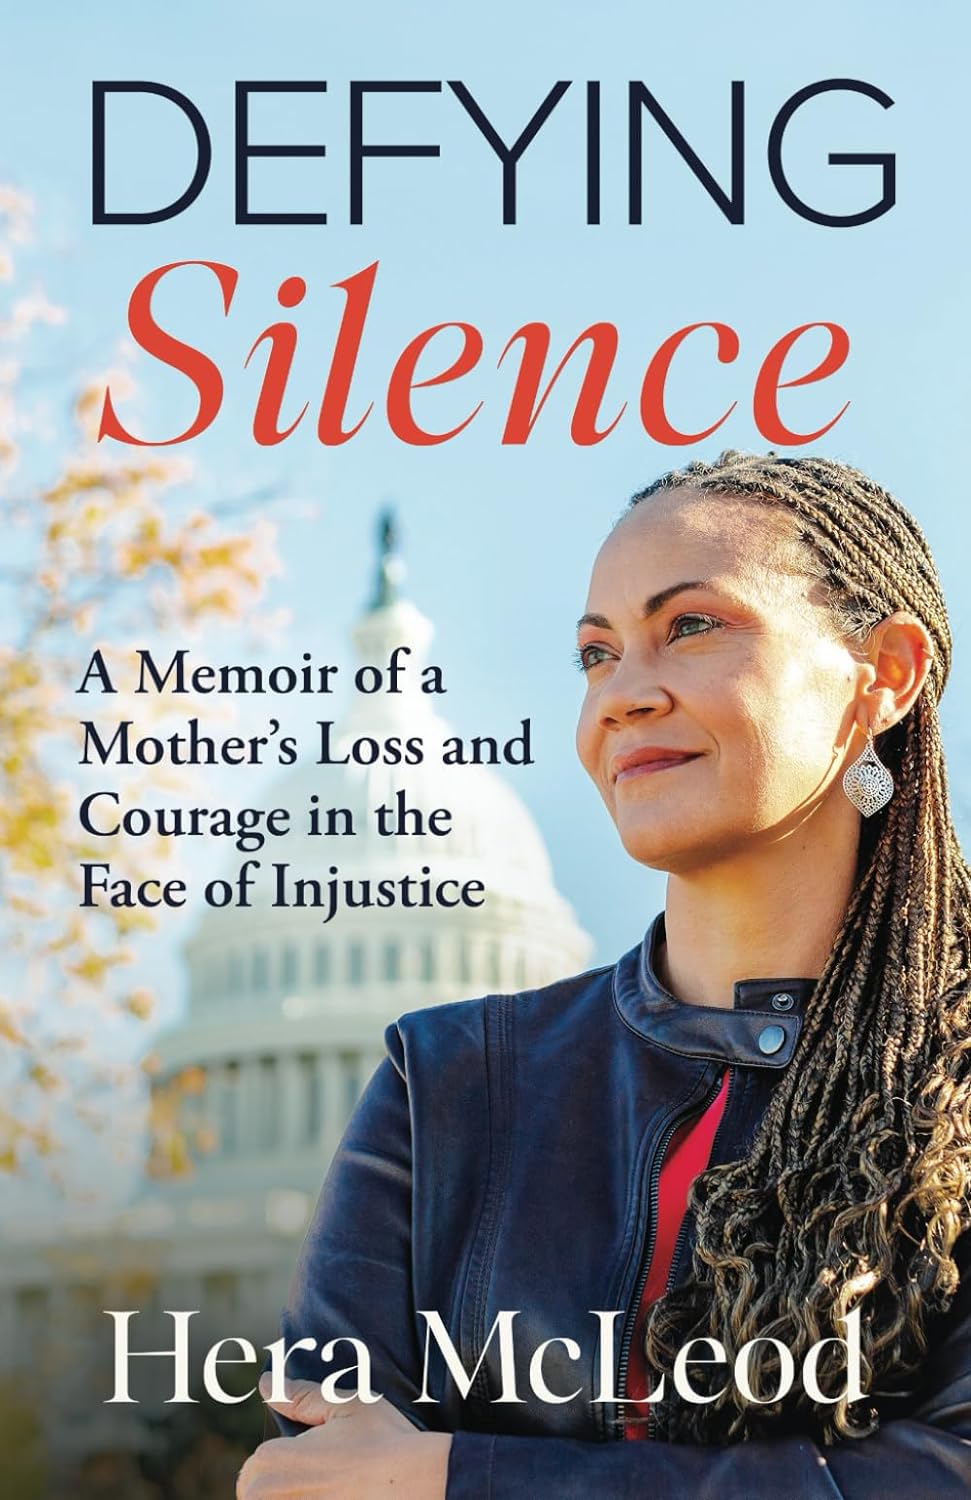 Hera McLeod Speaks Out to Validate Survivors and Expose Injustice